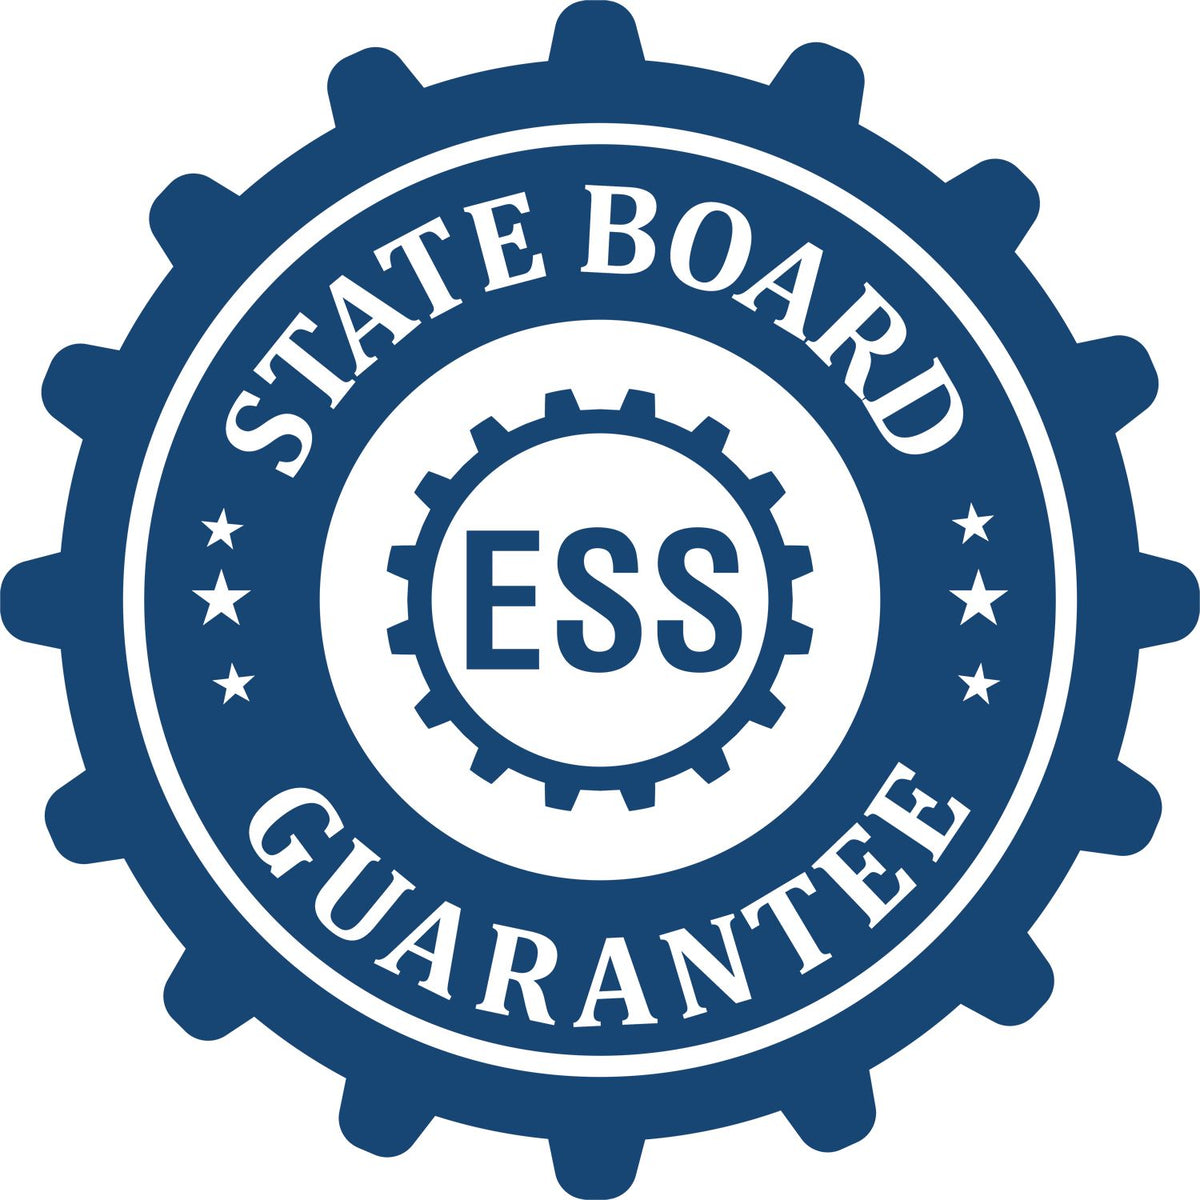 An emblem in a gear shape illustrating a state board guarantee for the Digital Arkansas Landscape Architect Stamp product.